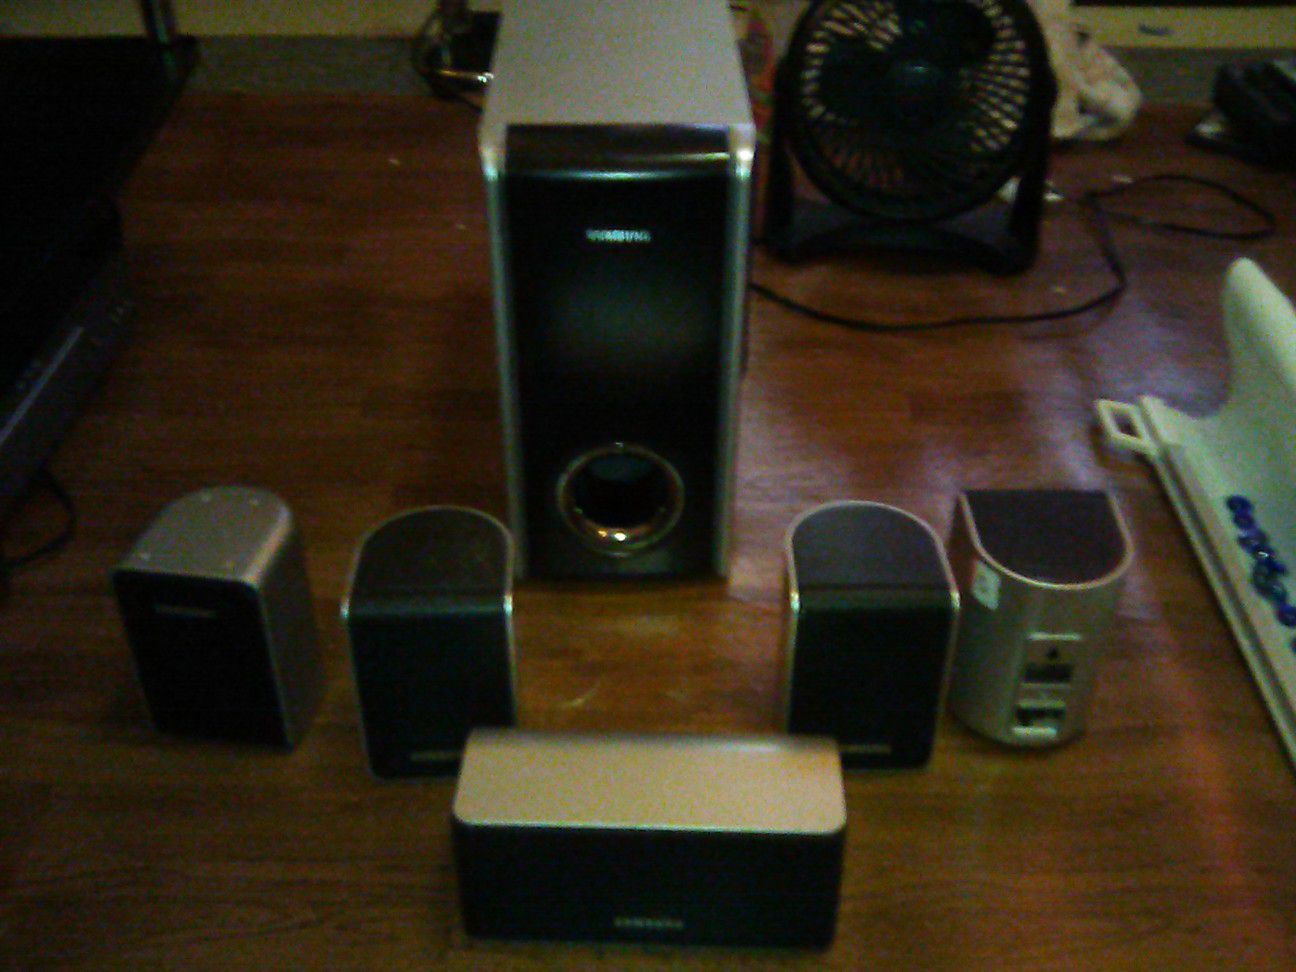 Samsung Subwoofer speaker system includes one subwoofer with front left and right speakers rear left and right speakers and one center speaker